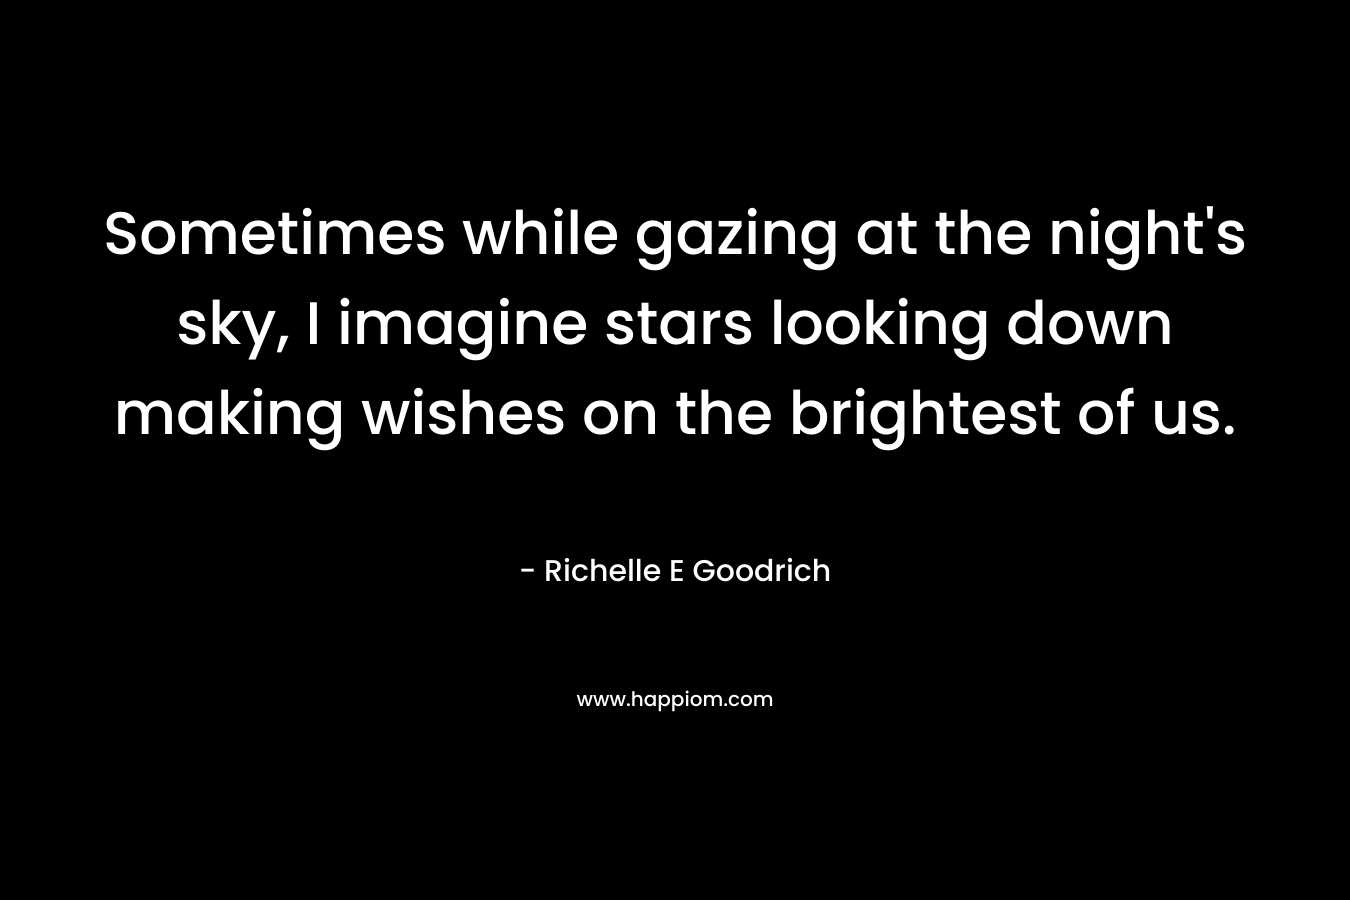 Sometimes while gazing at the night’s sky, I imagine stars looking down making wishes on the brightest of us. – Richelle E Goodrich